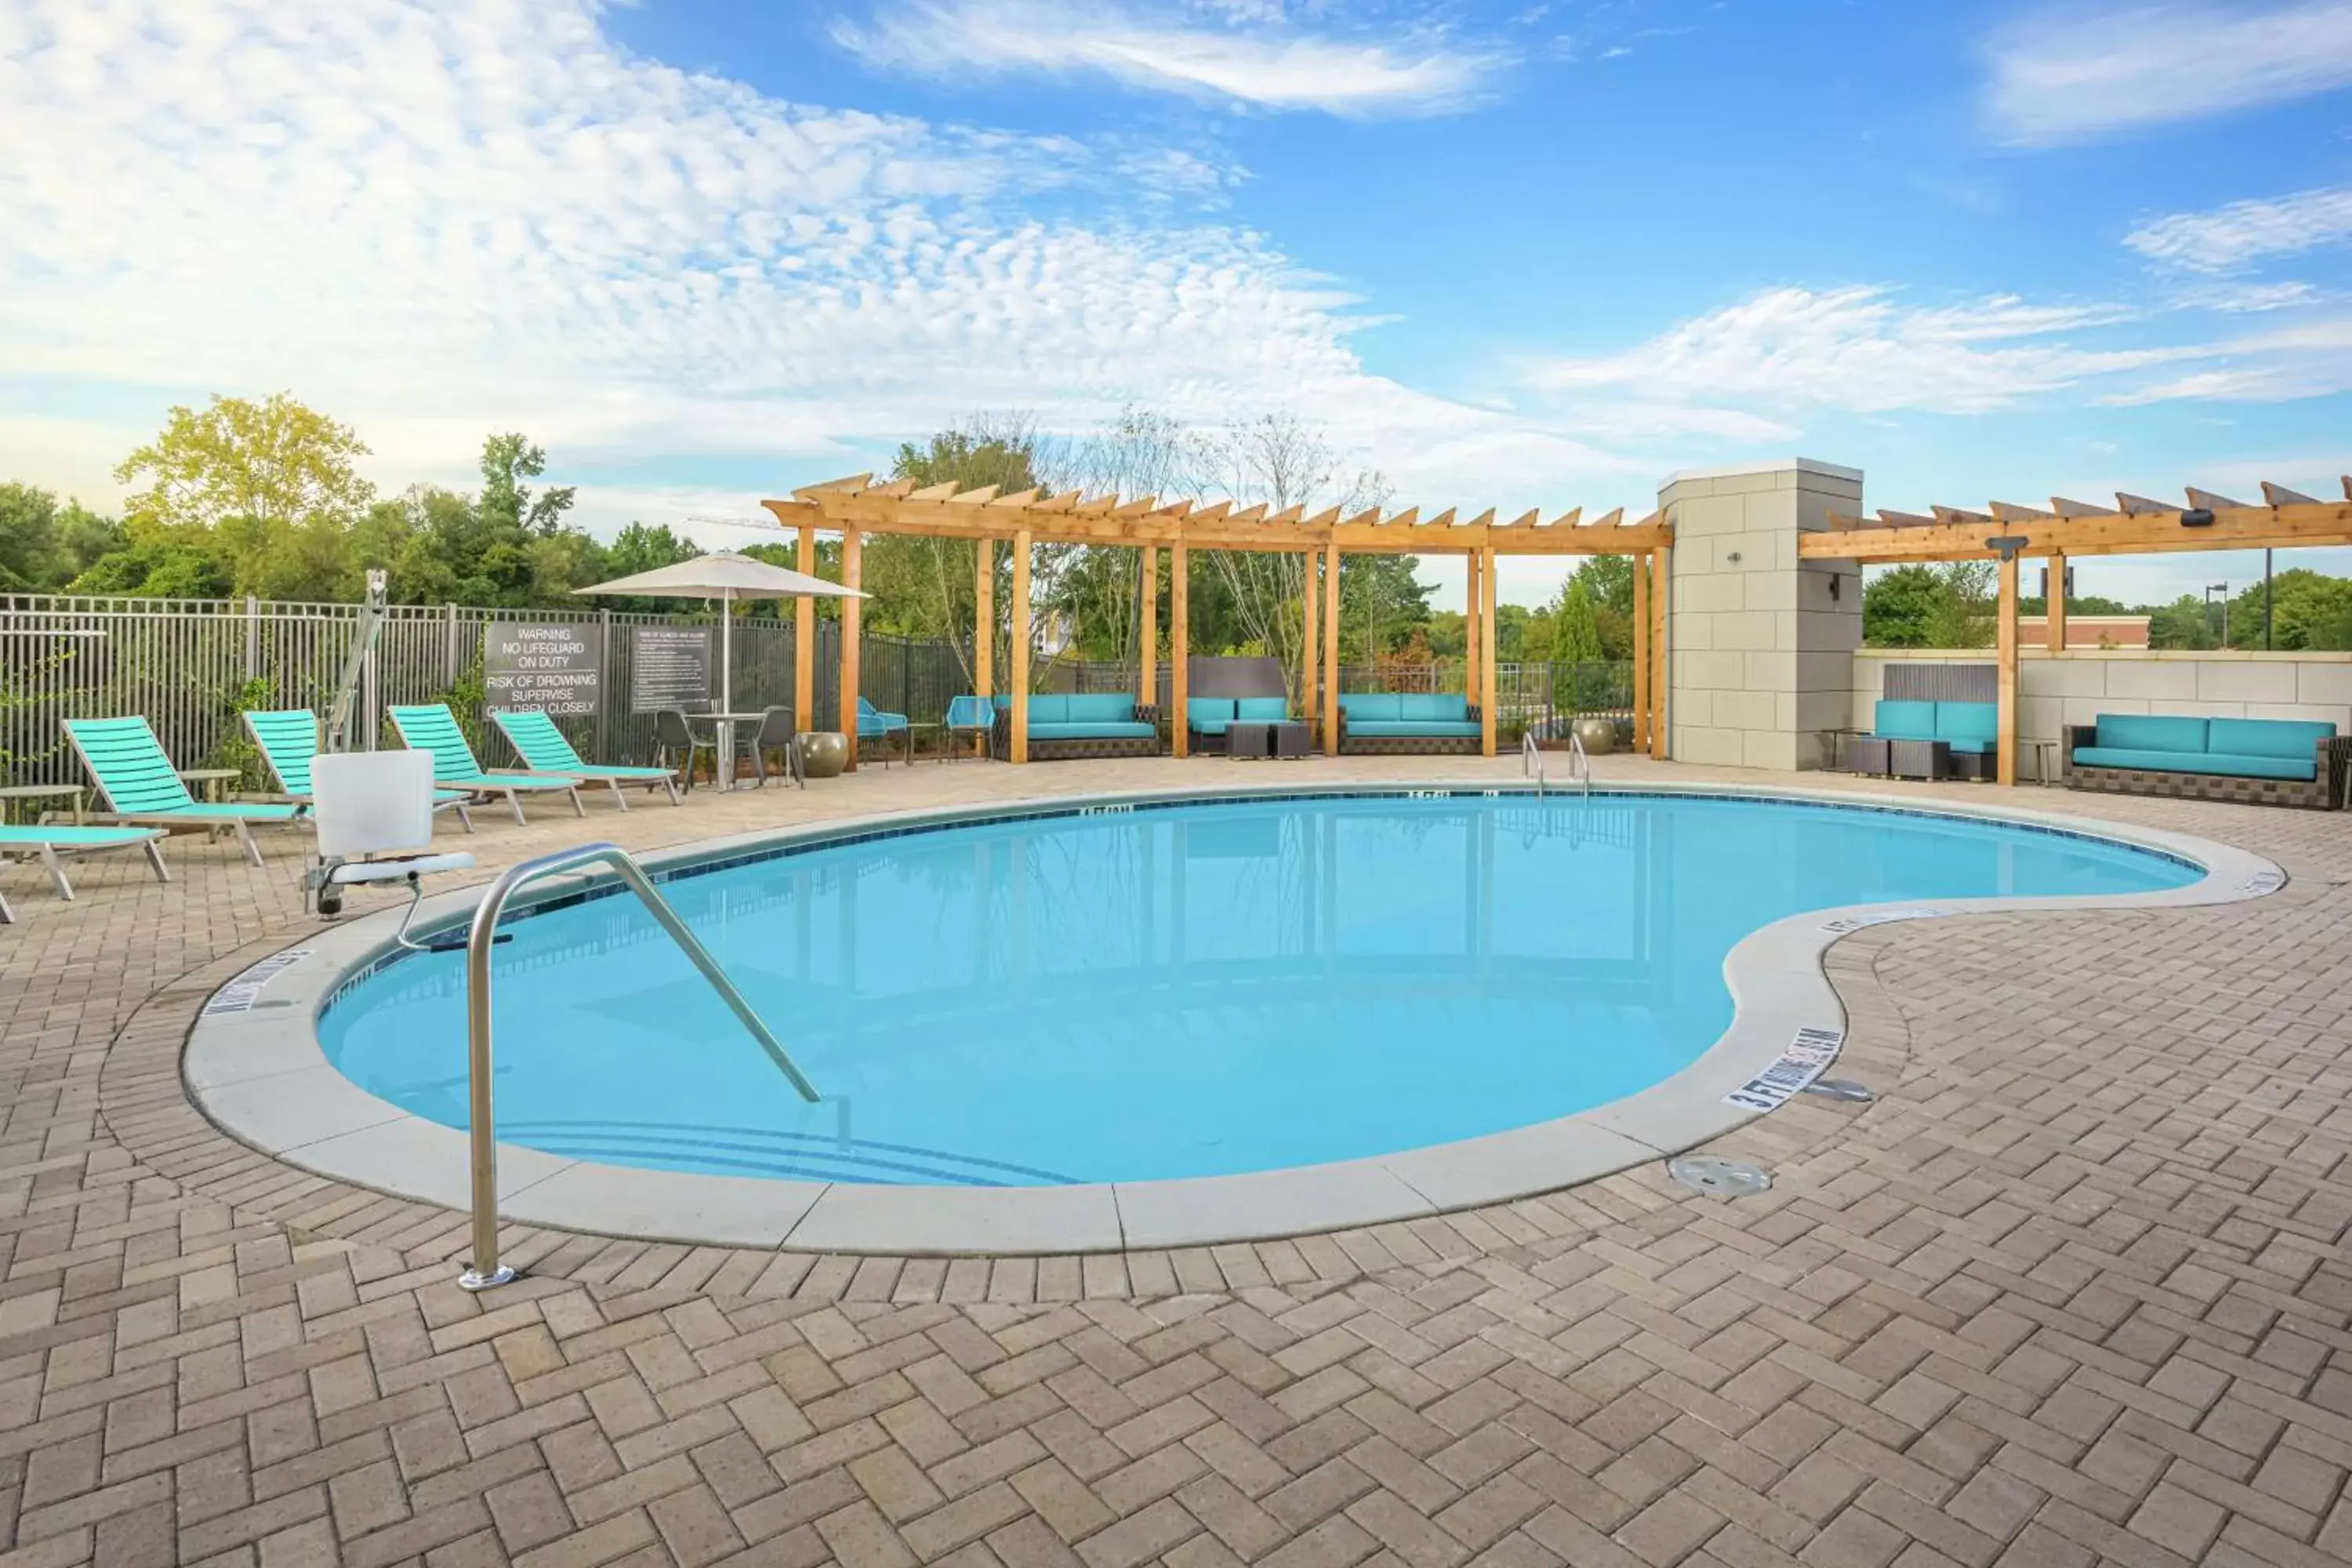 Pool view, Swimming Pool in Home2 Suites By Hilton Atlanta Nw/Kennesaw, Ga